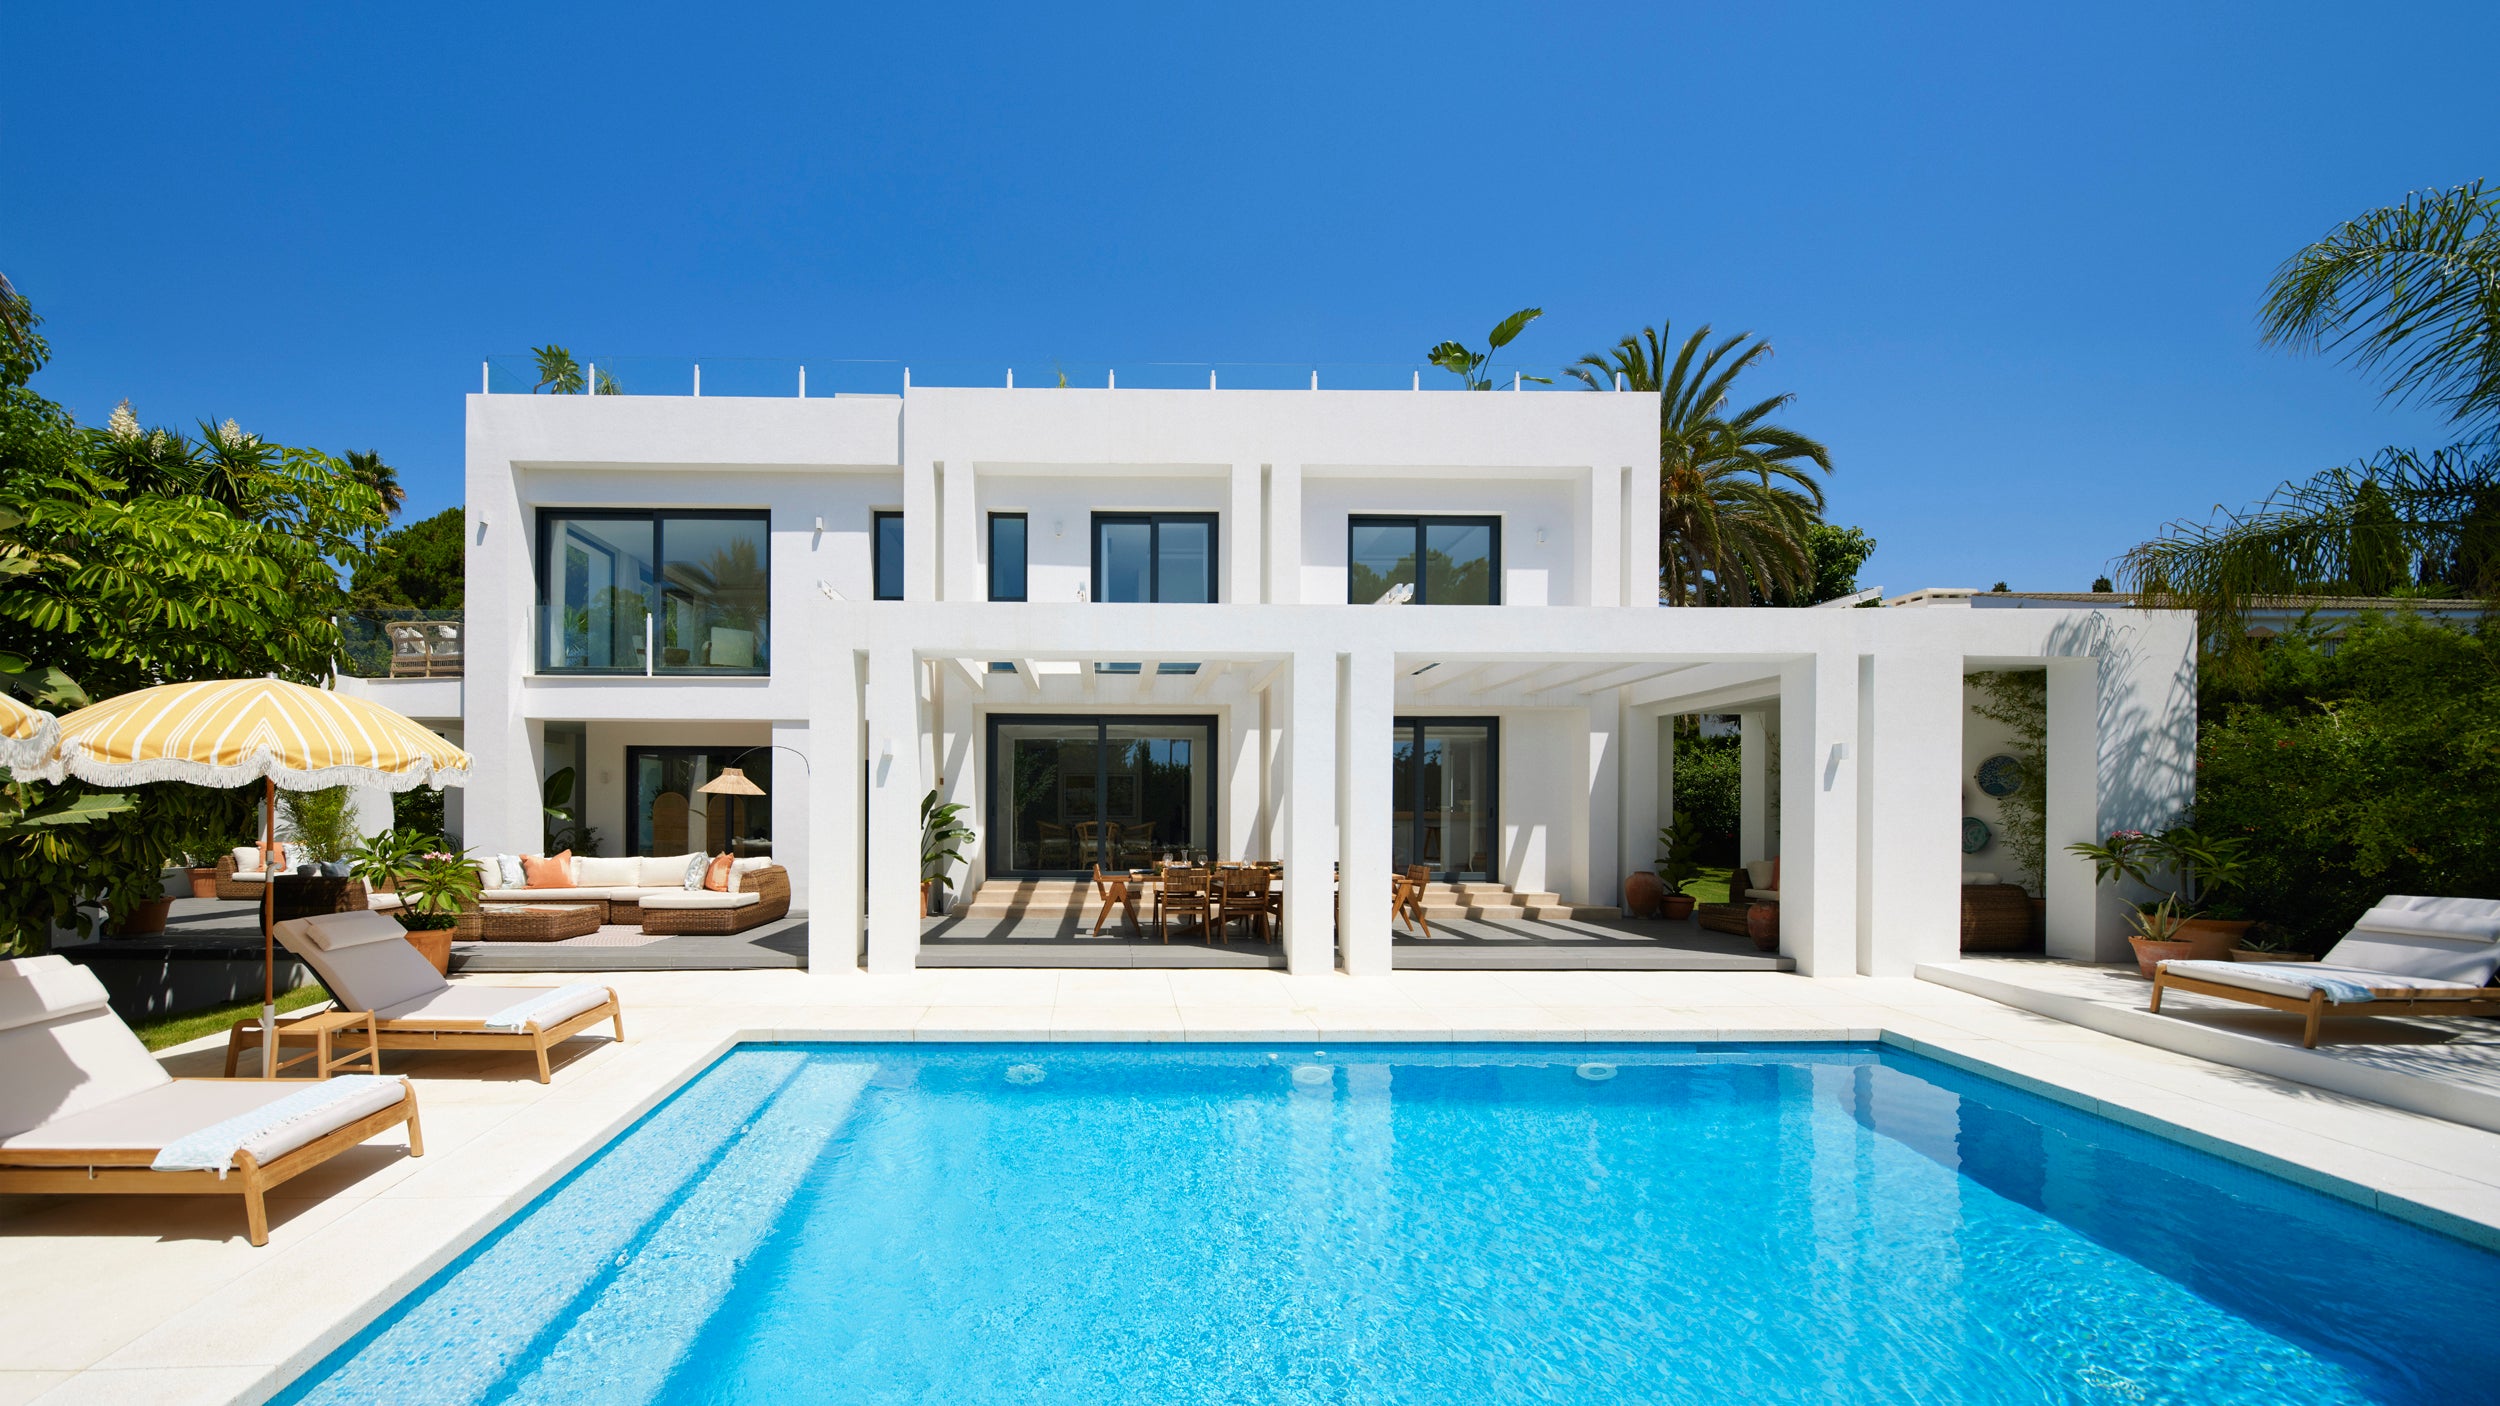 The Omaze Marbella Superdraw - Holiday Villa and pool in the sun